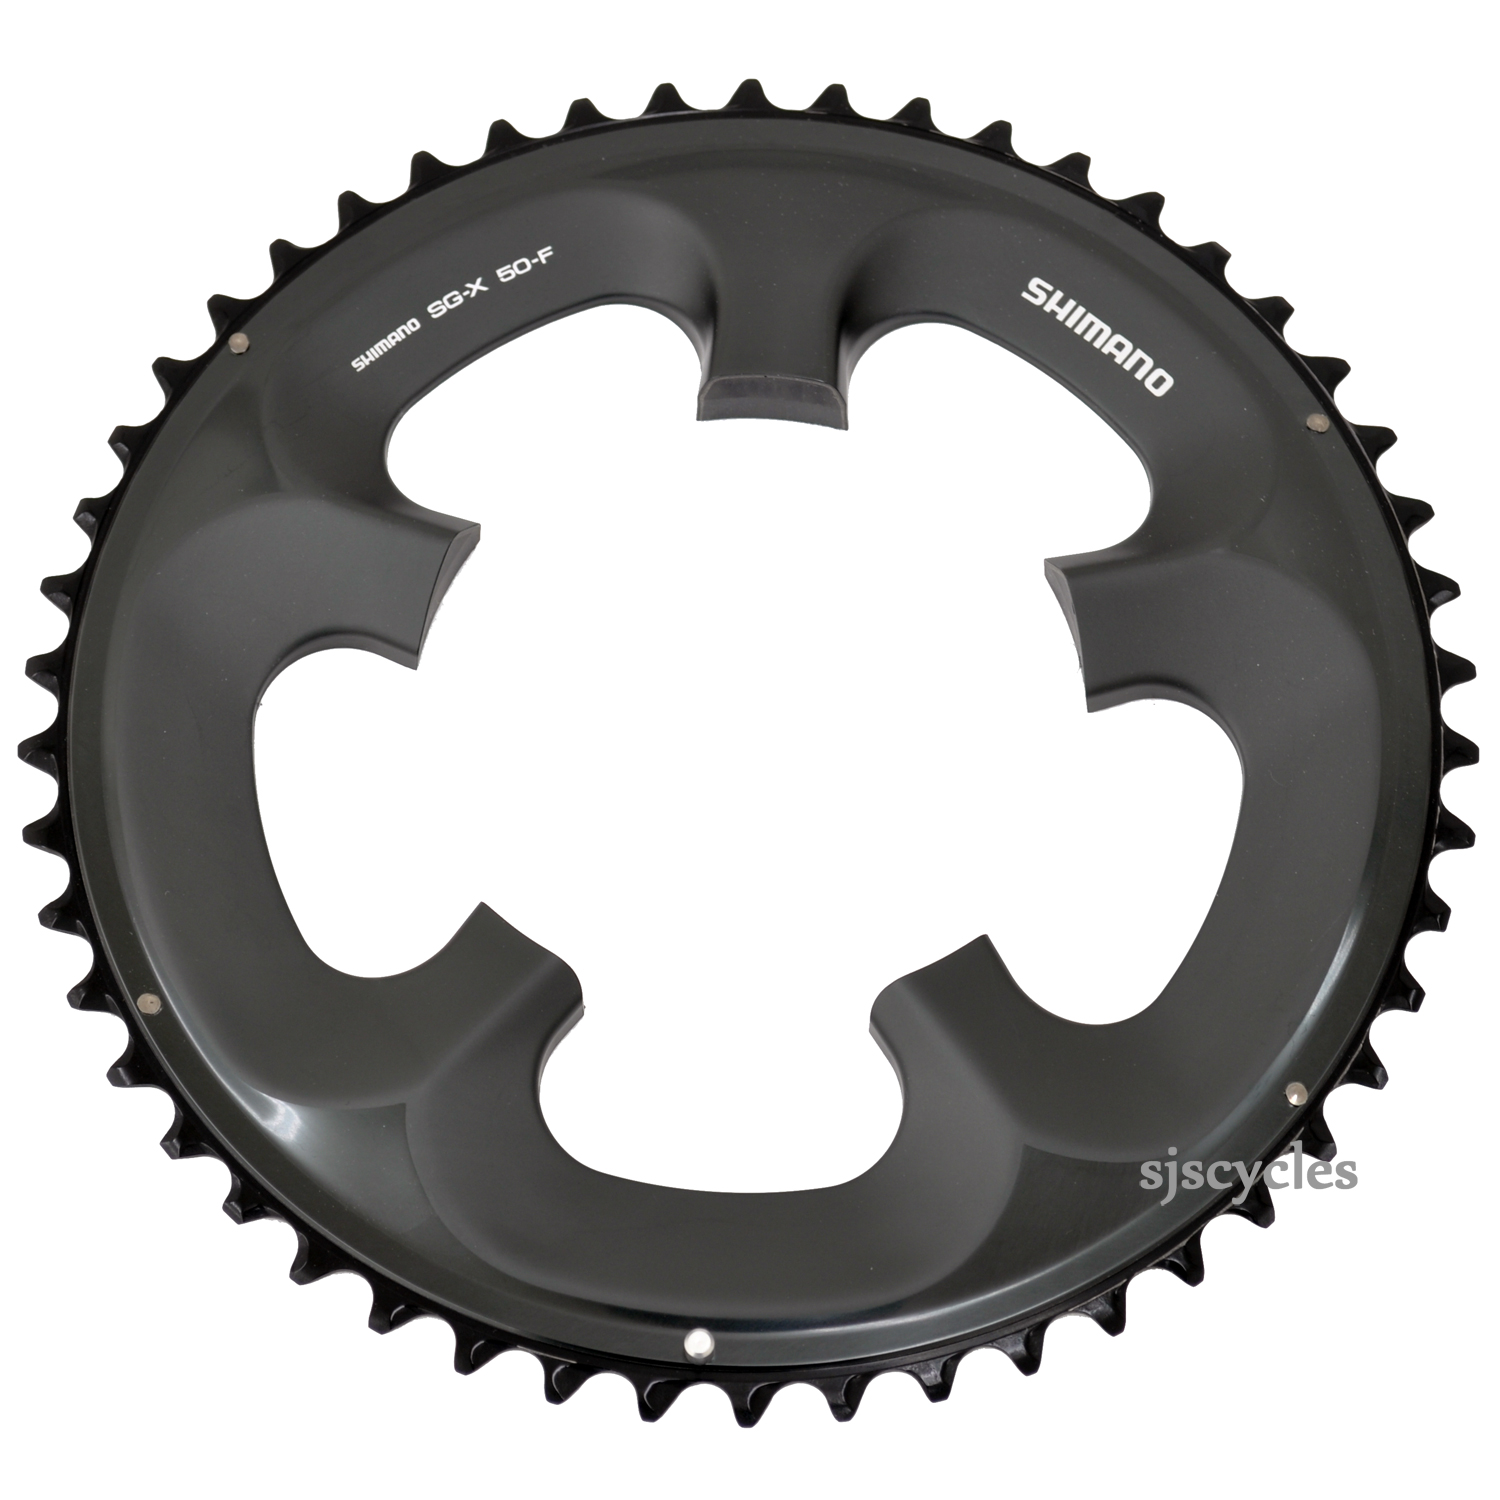 Double Shimano Ultegra FC-6750 Chainring 50T 110mm BCD Glossy Grey 